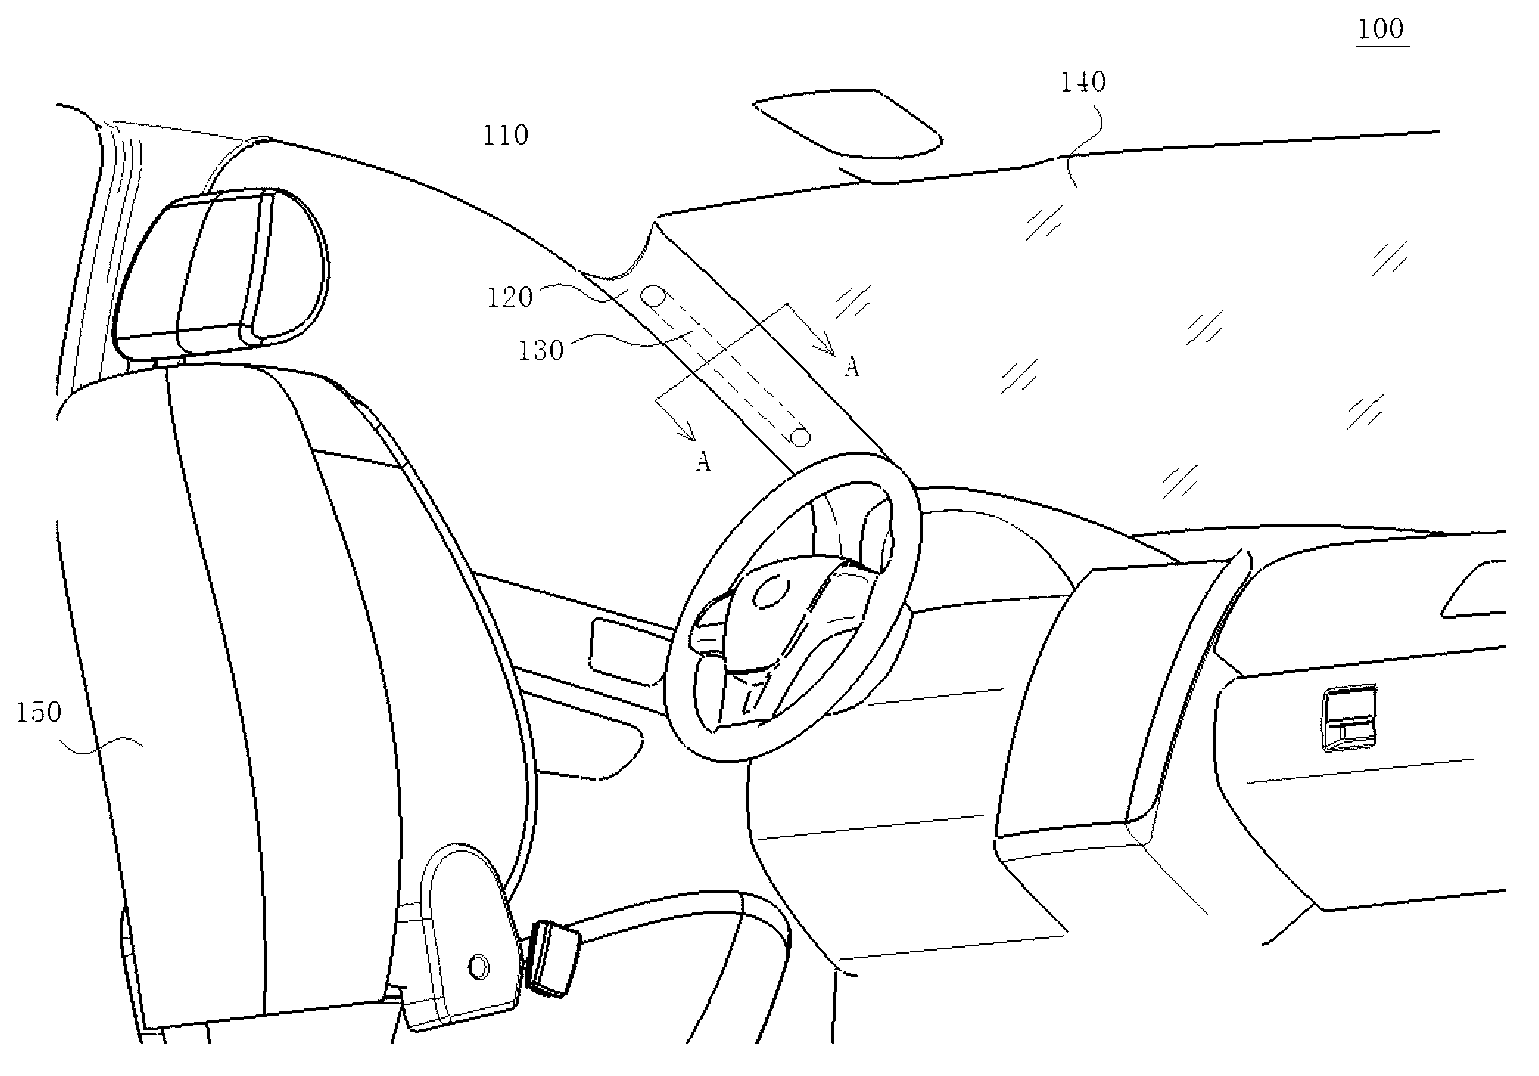 Automobile airbag and automobile